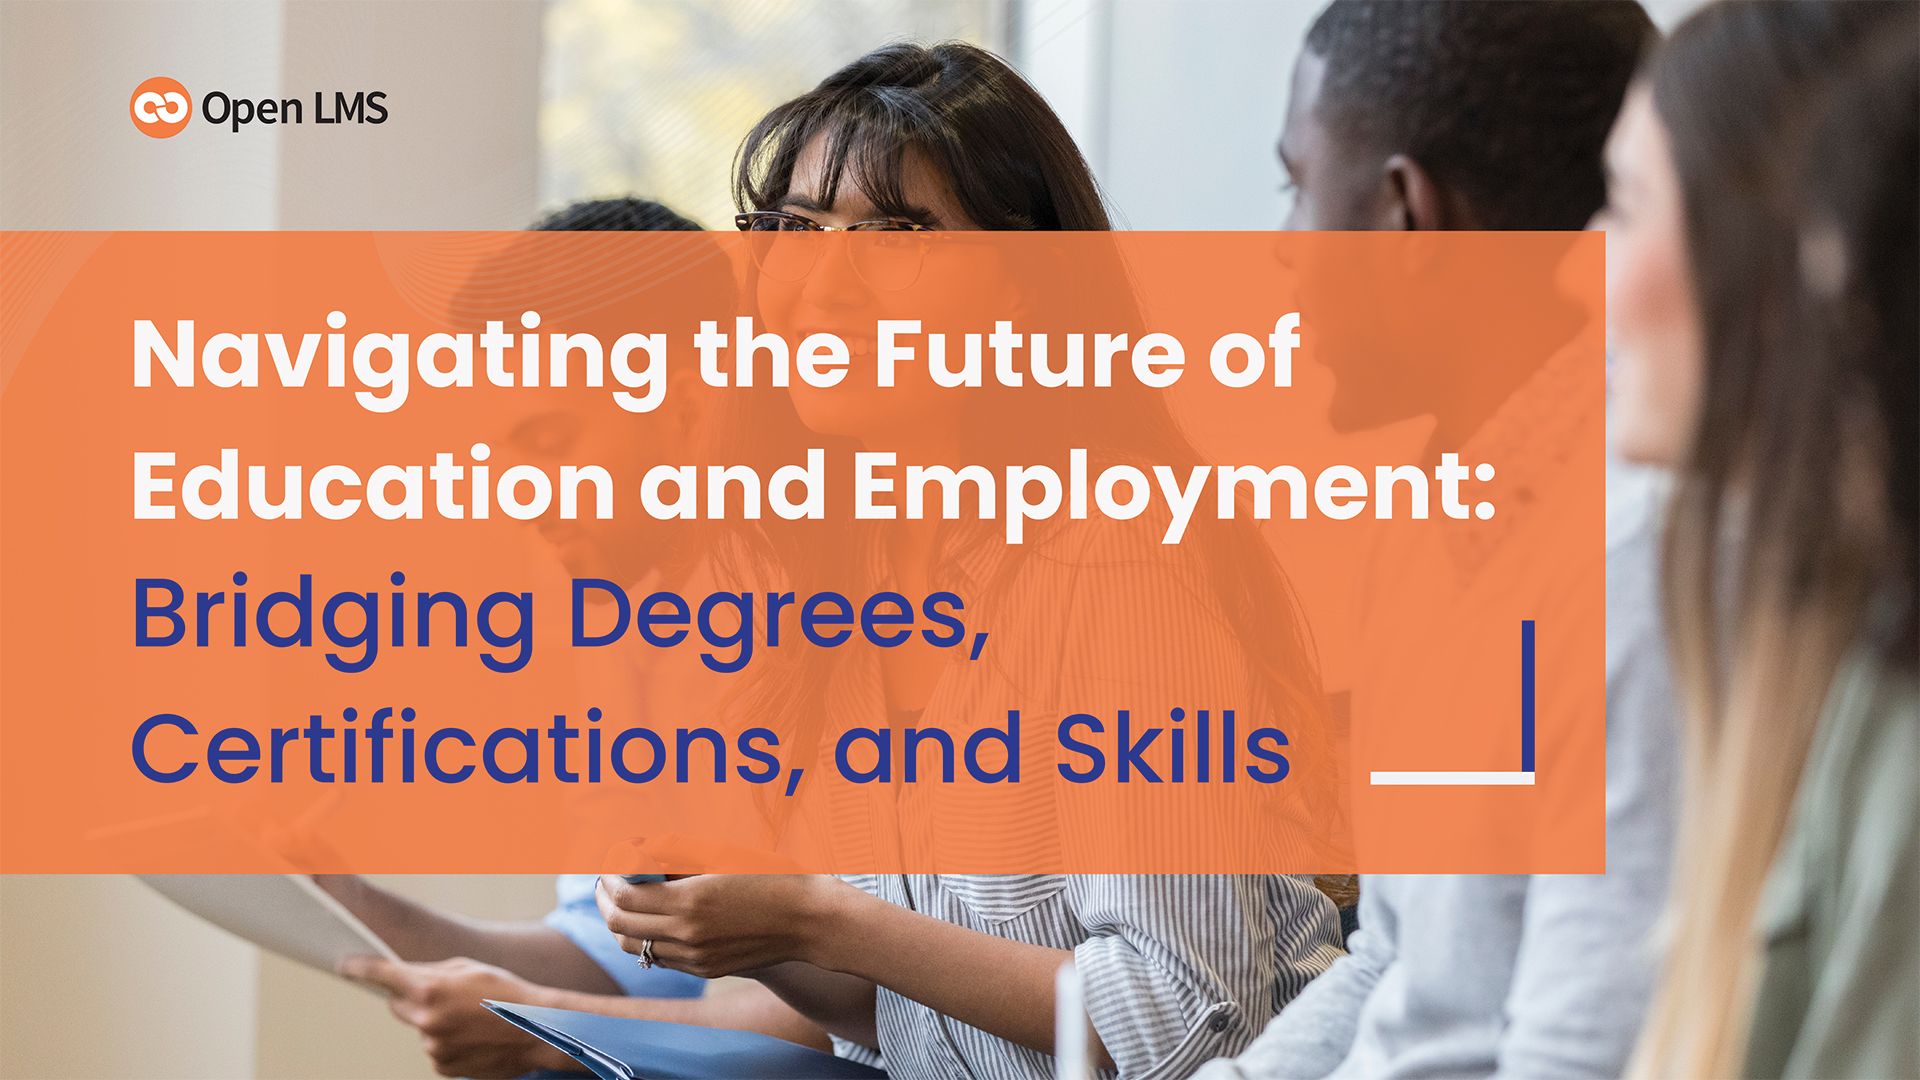 Navigating the Future of Education and Employment: Bridging Degrees, Certifications, and Skills